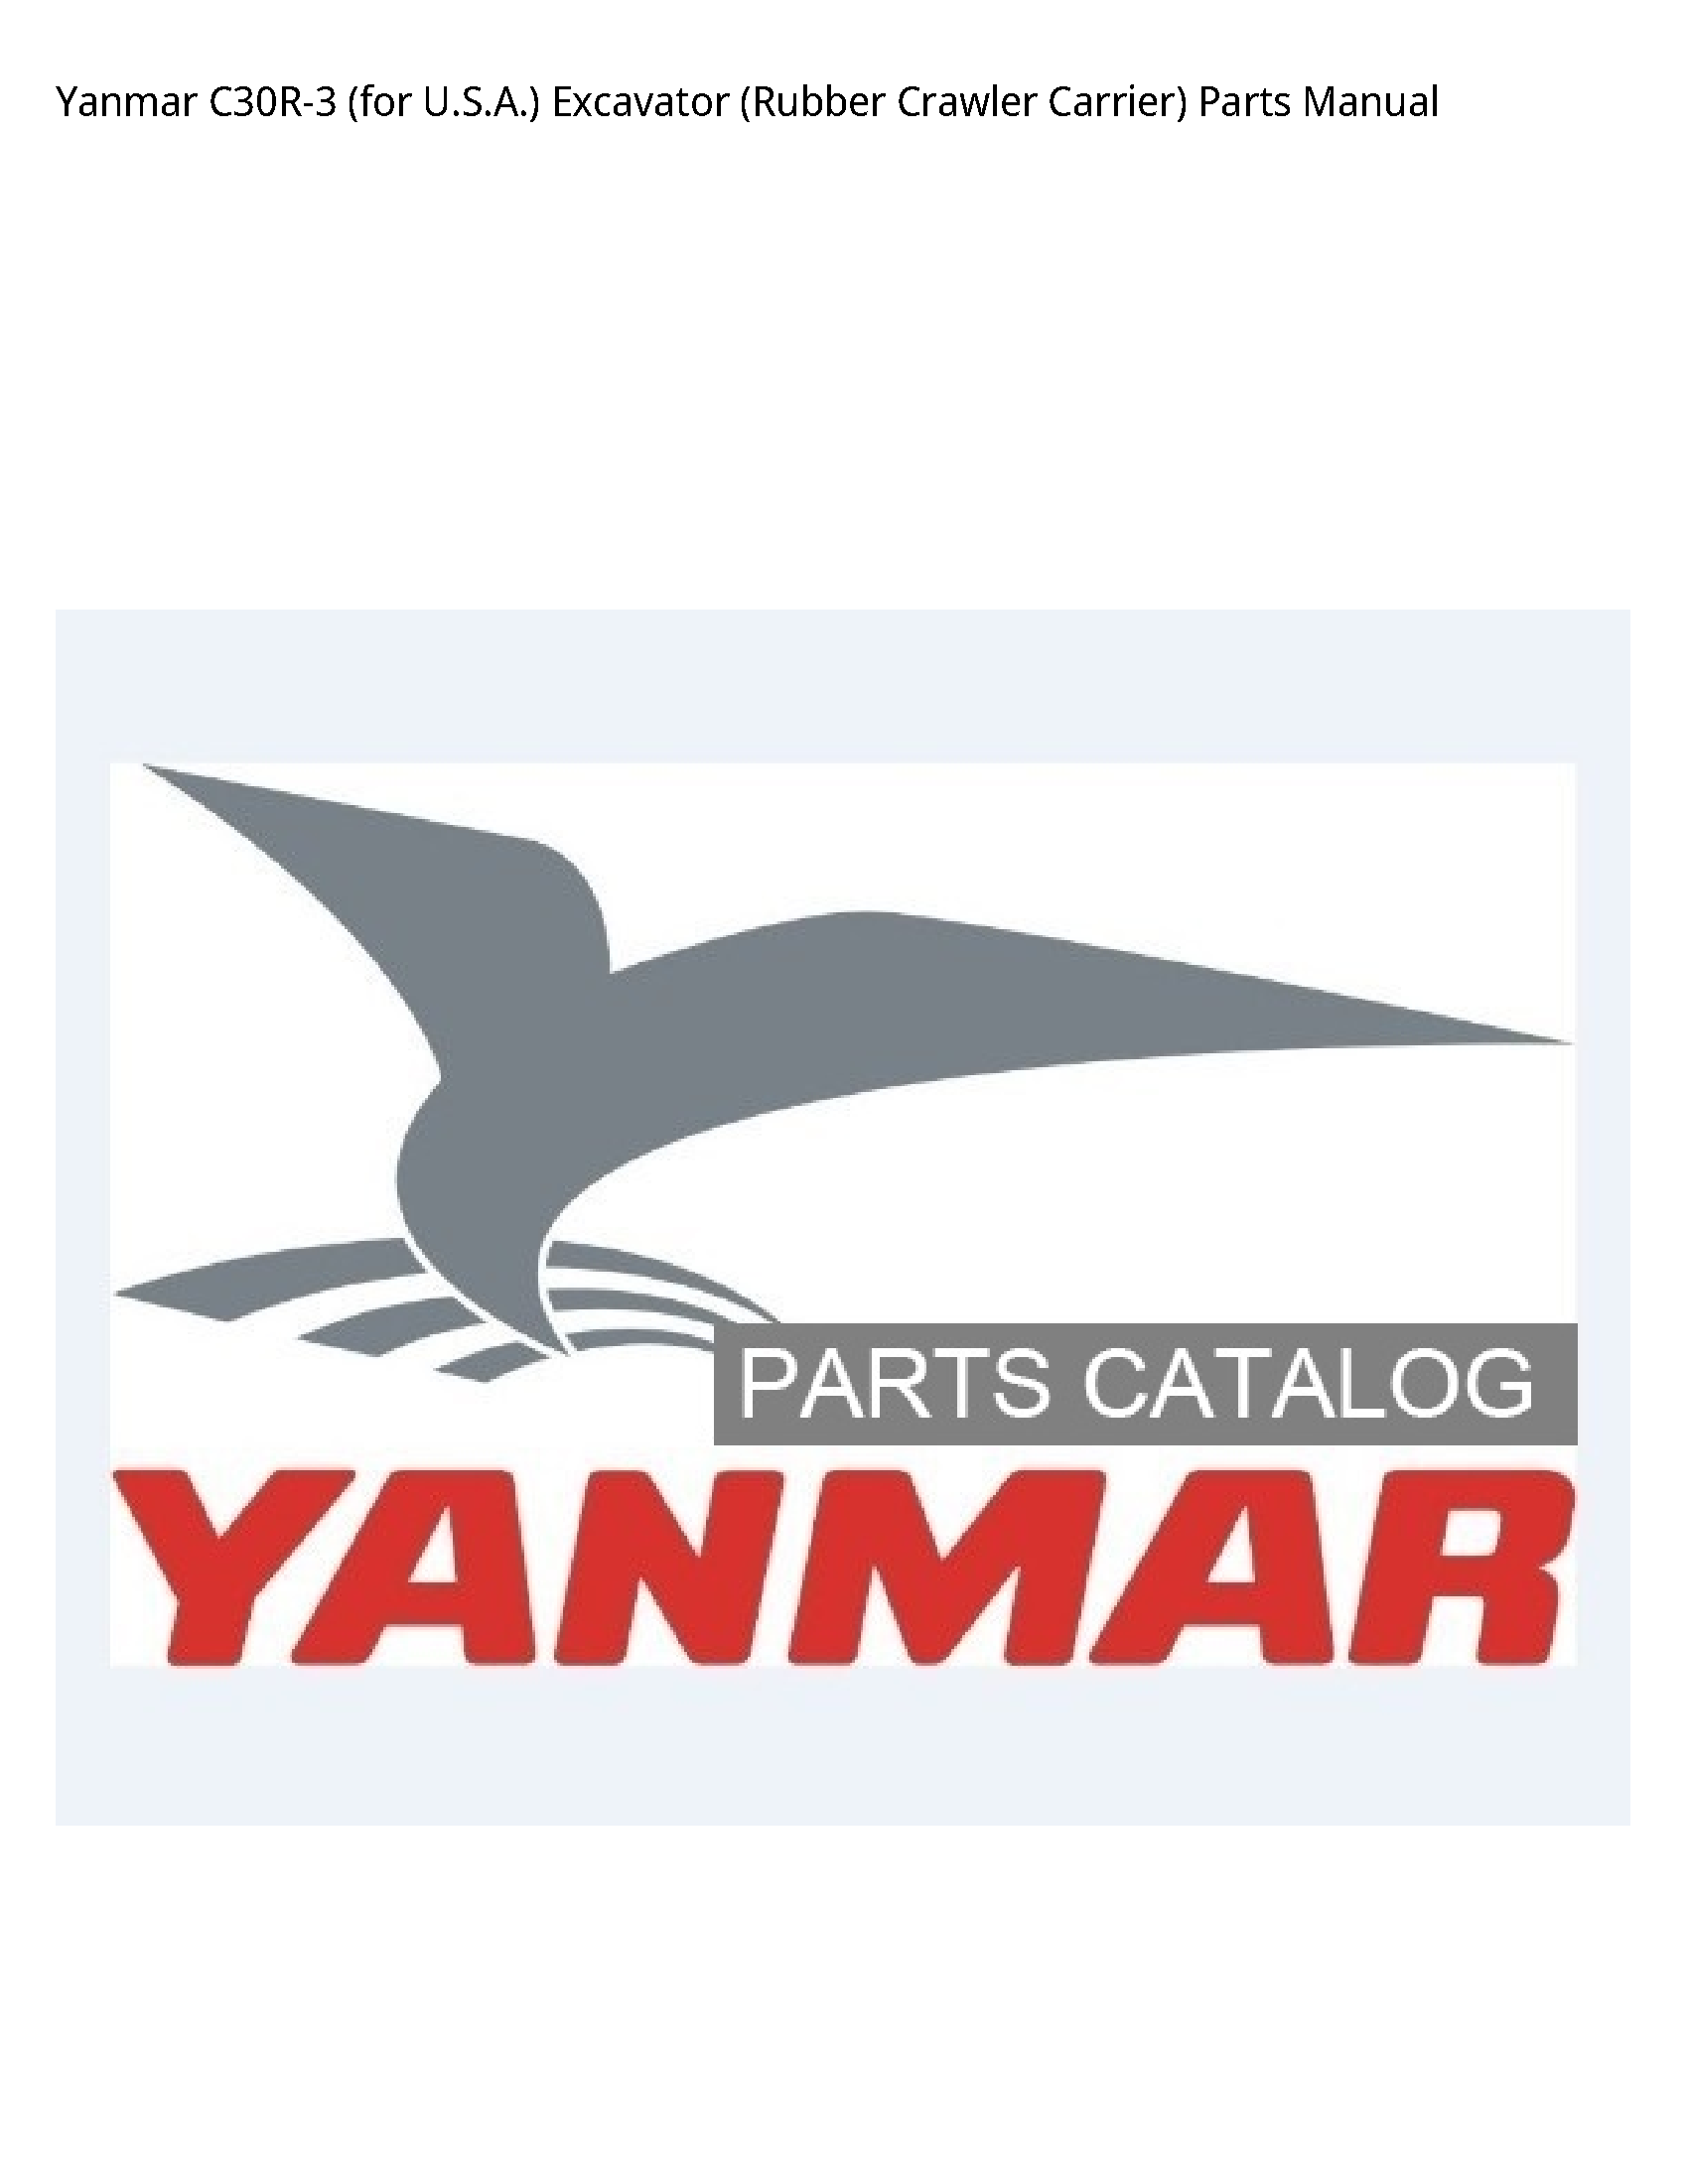 Yanmar C30R-3 (for U.S.A.) Excavator (Rubber Crawler Carrier) Parts manual